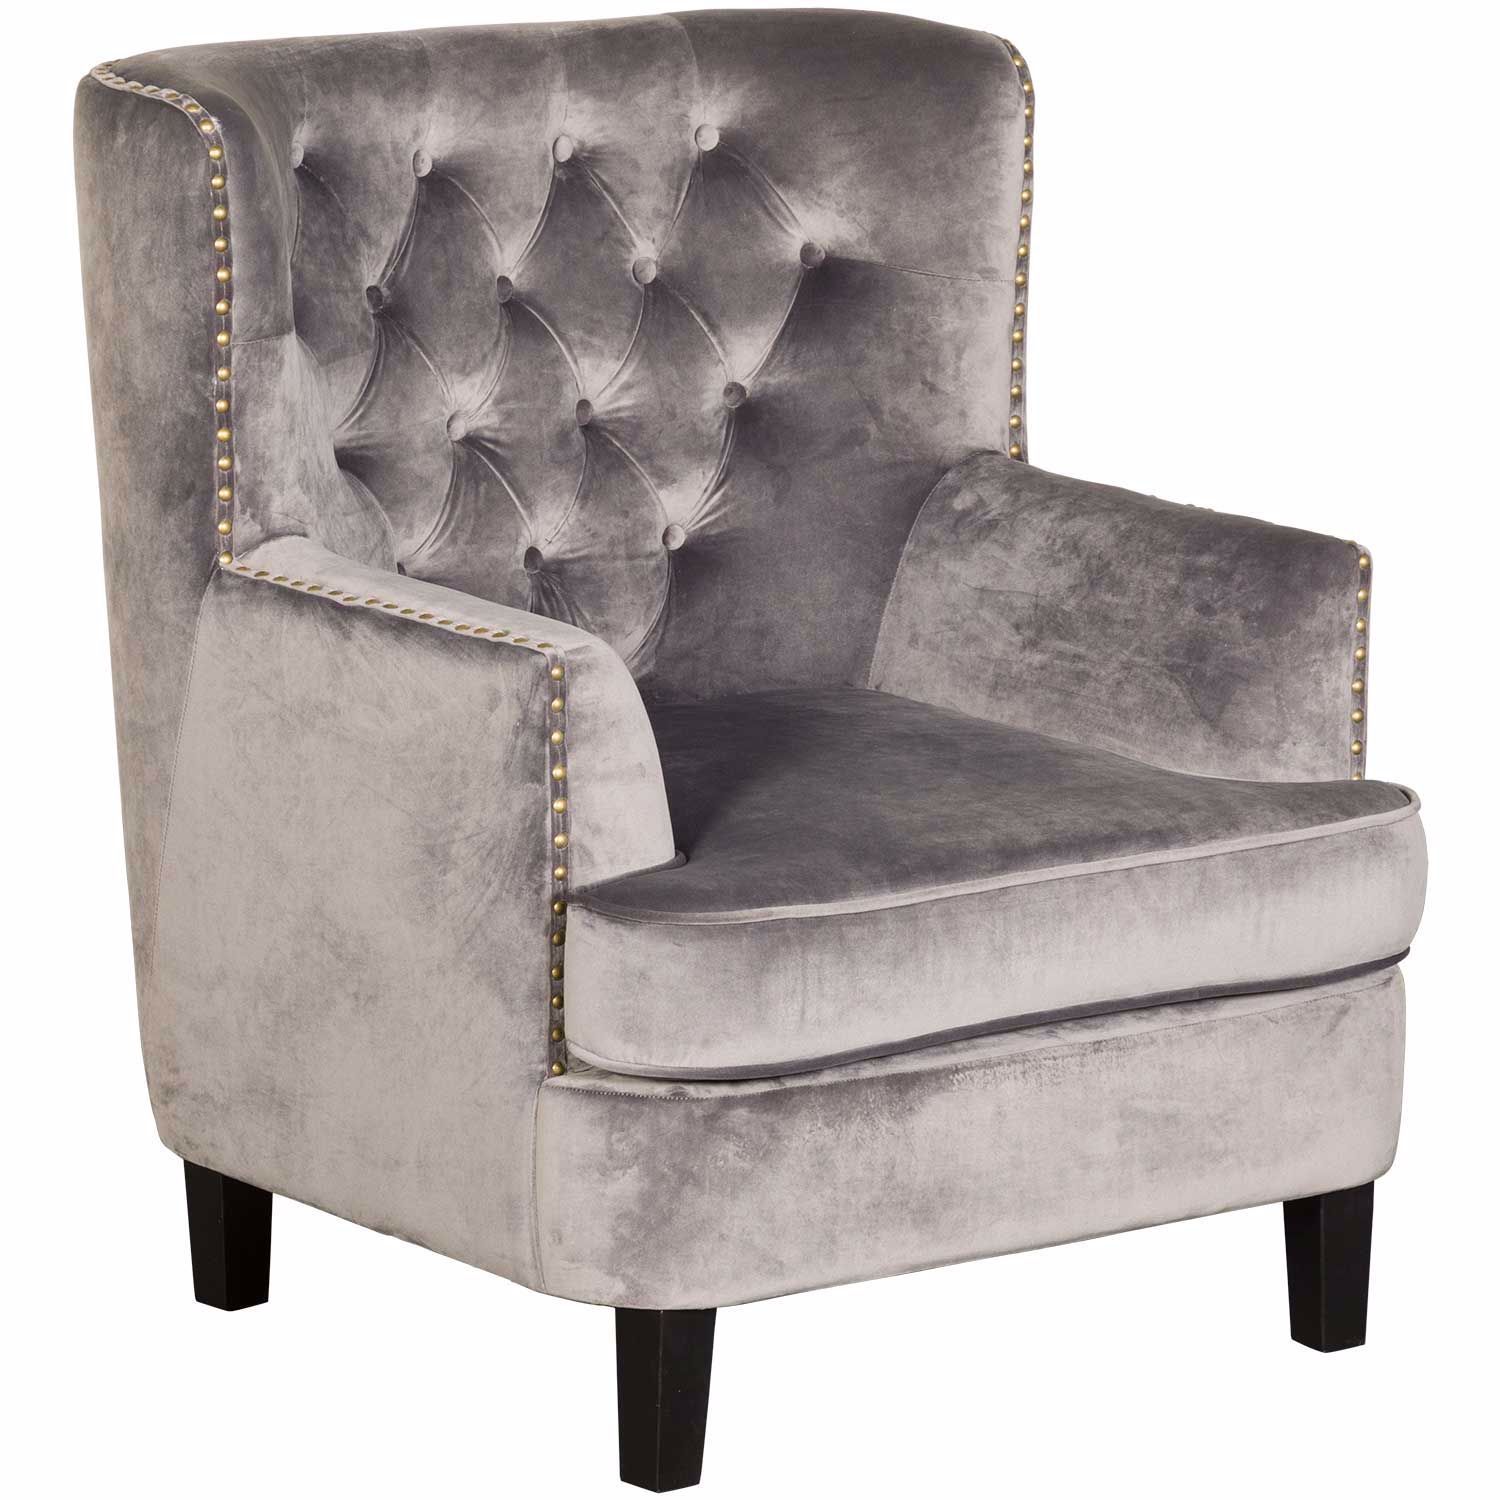 Phillips Gray Tufted Accent Chair Throughout Velvet Tufted Accent Chairs (View 13 of 20)